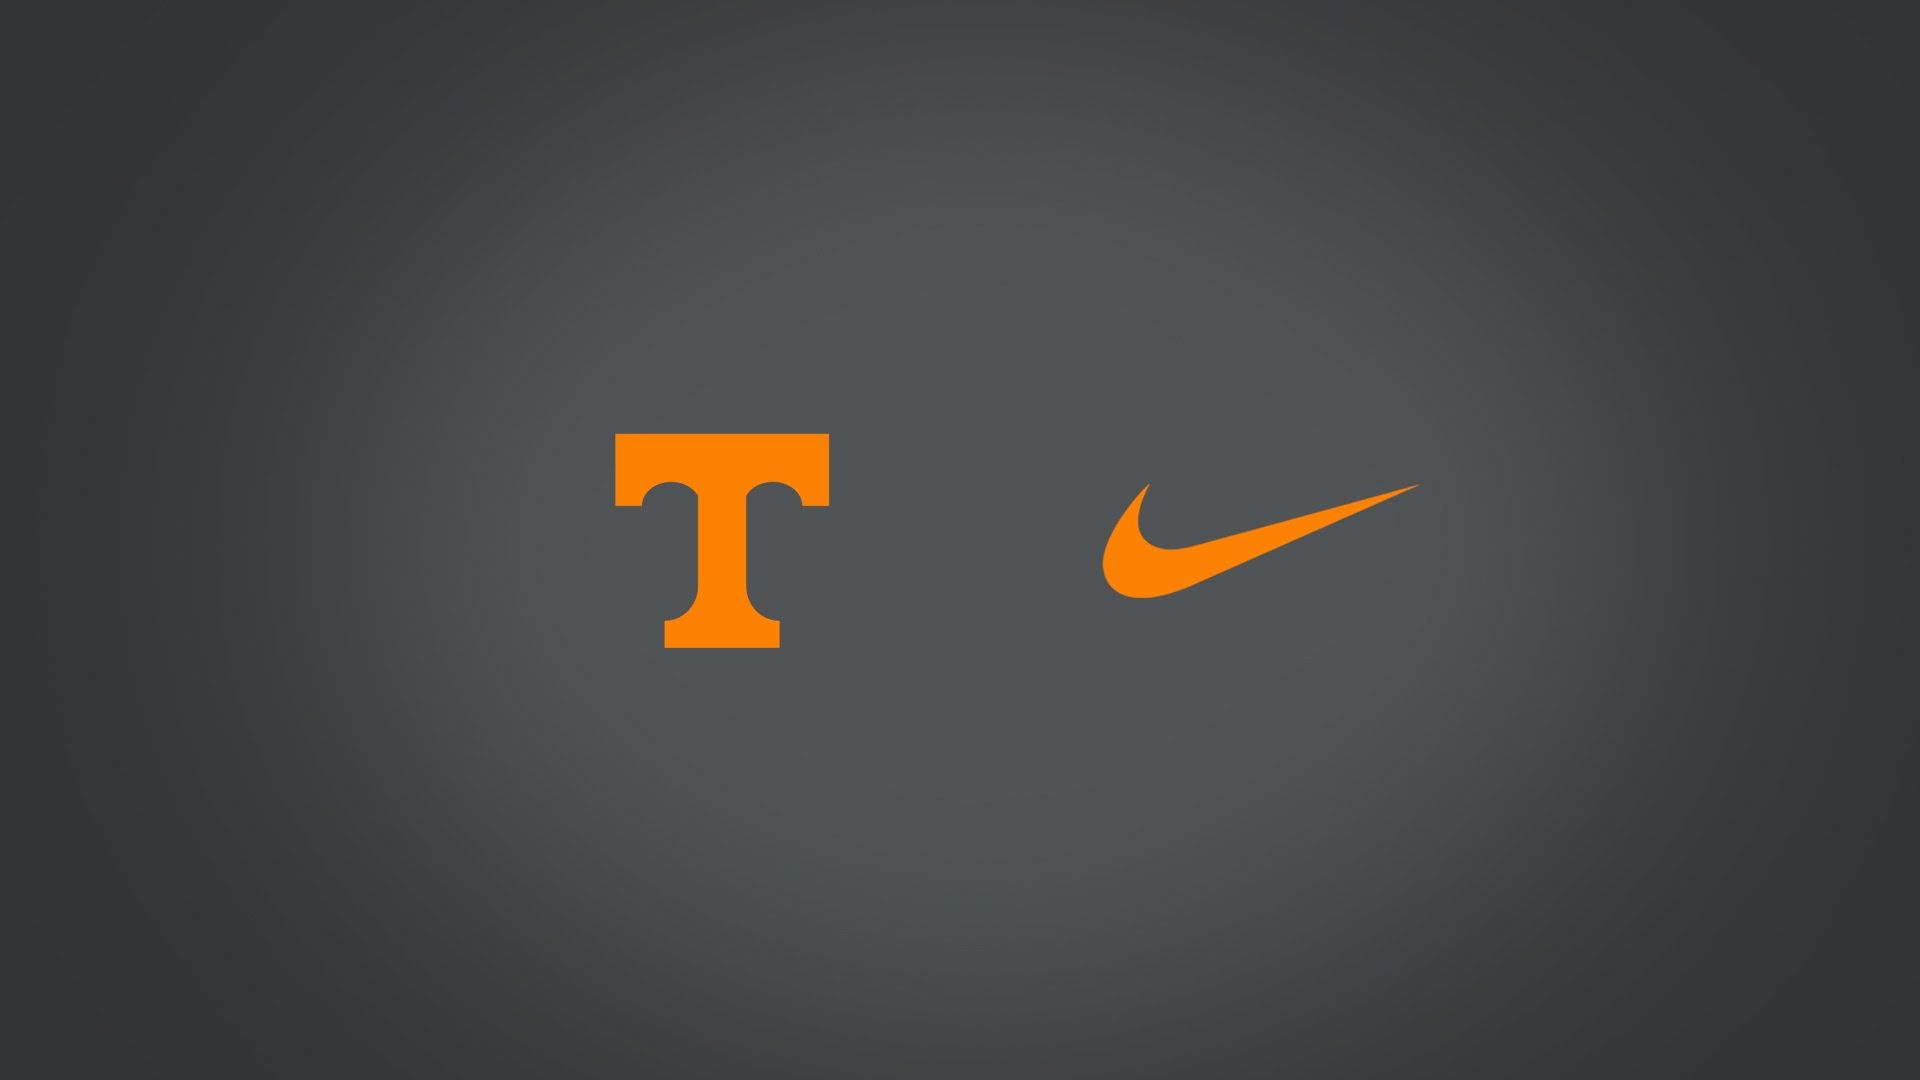 Tennessee / Nike Reveal Live Show - YouTube